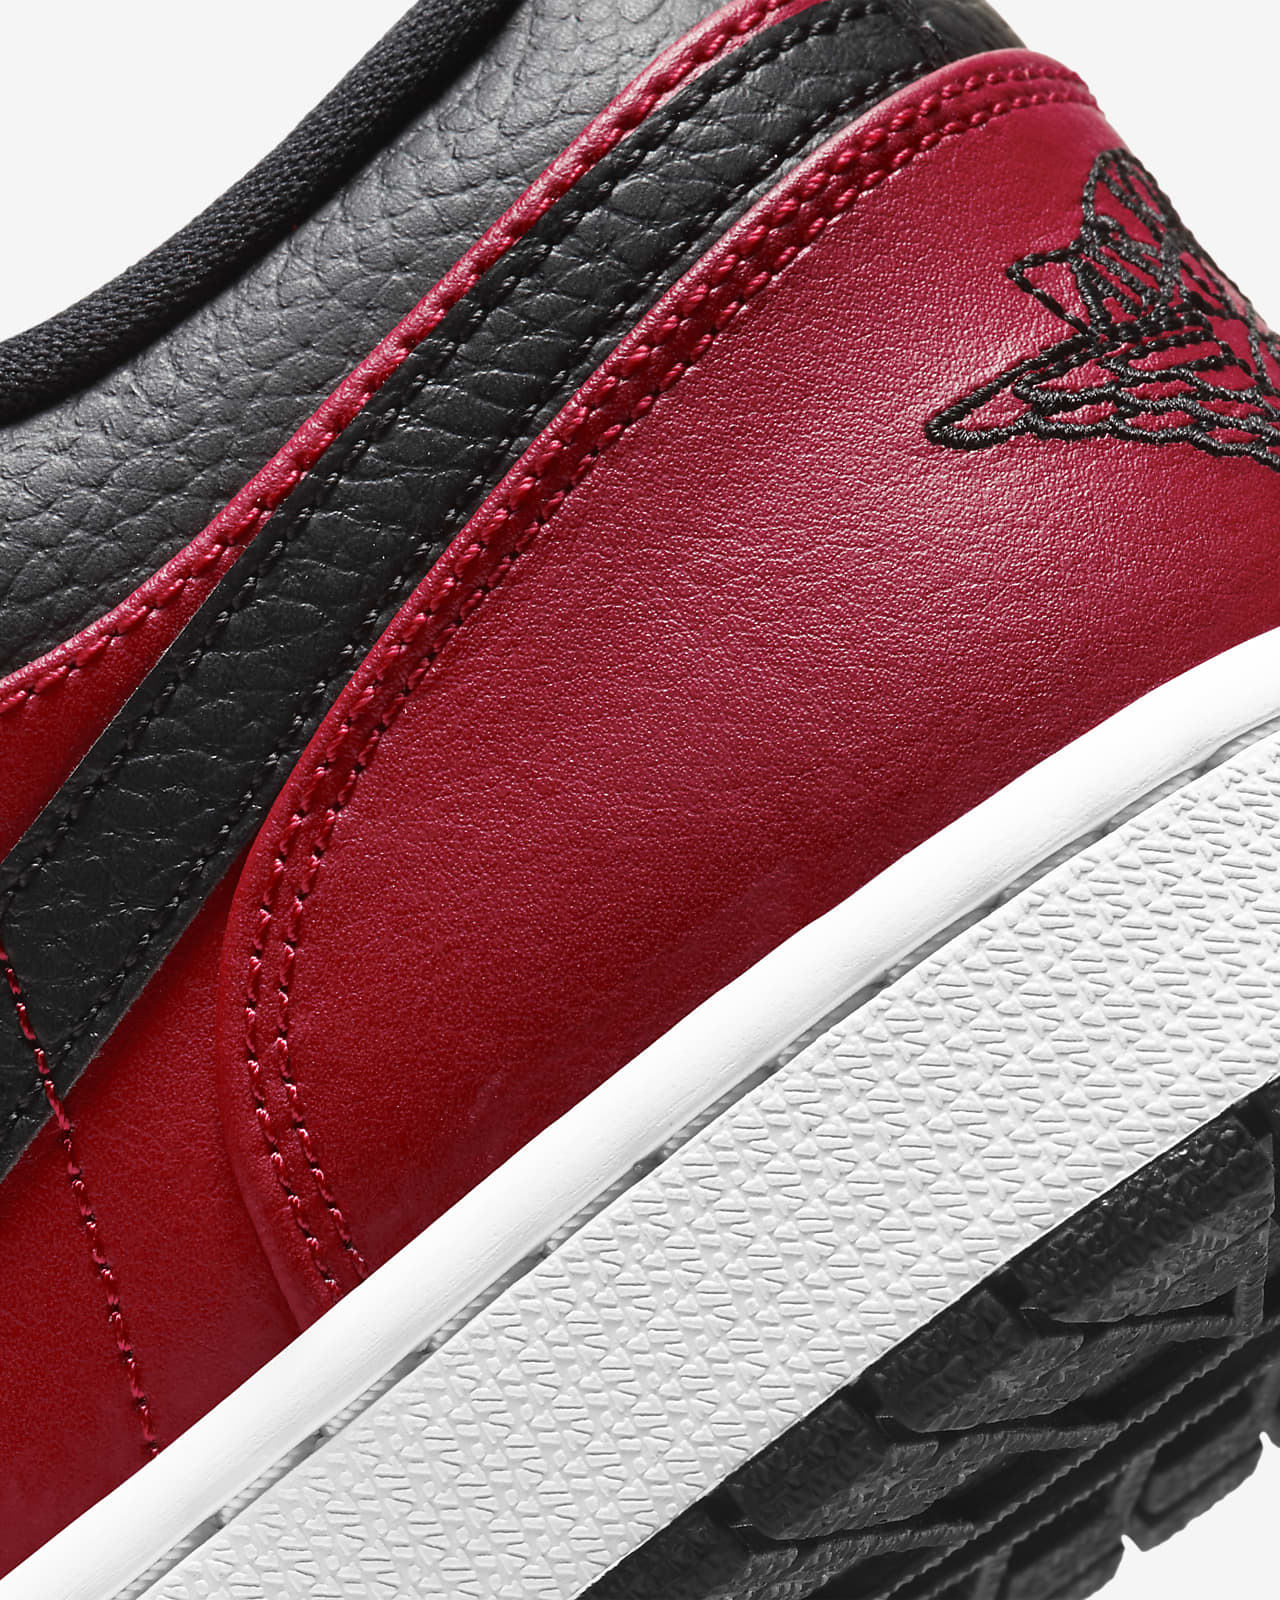 do jordan 1 lows fit true to size